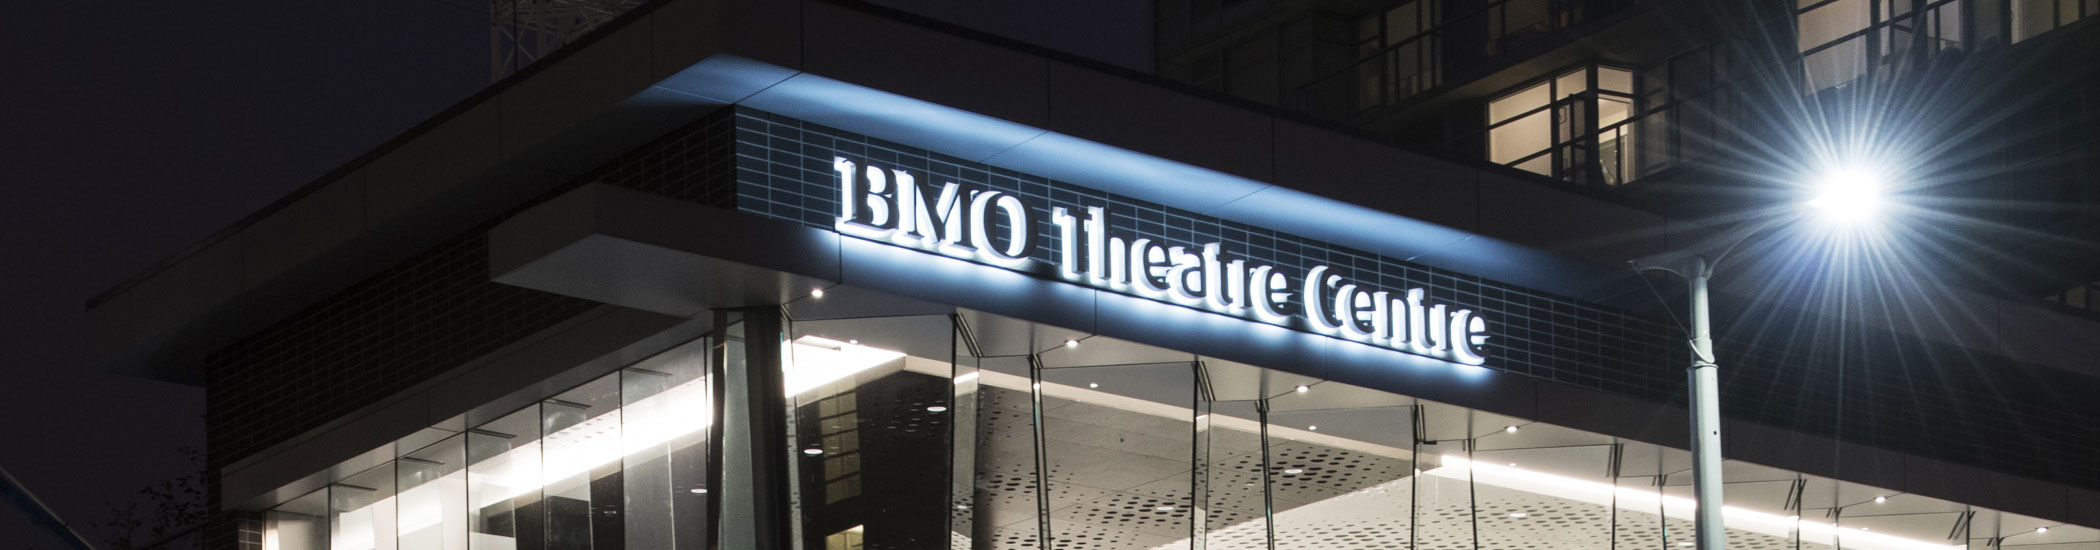 Photographed at night, the BMO Theatre Centre sign is glowing in white lights on the side of the building.